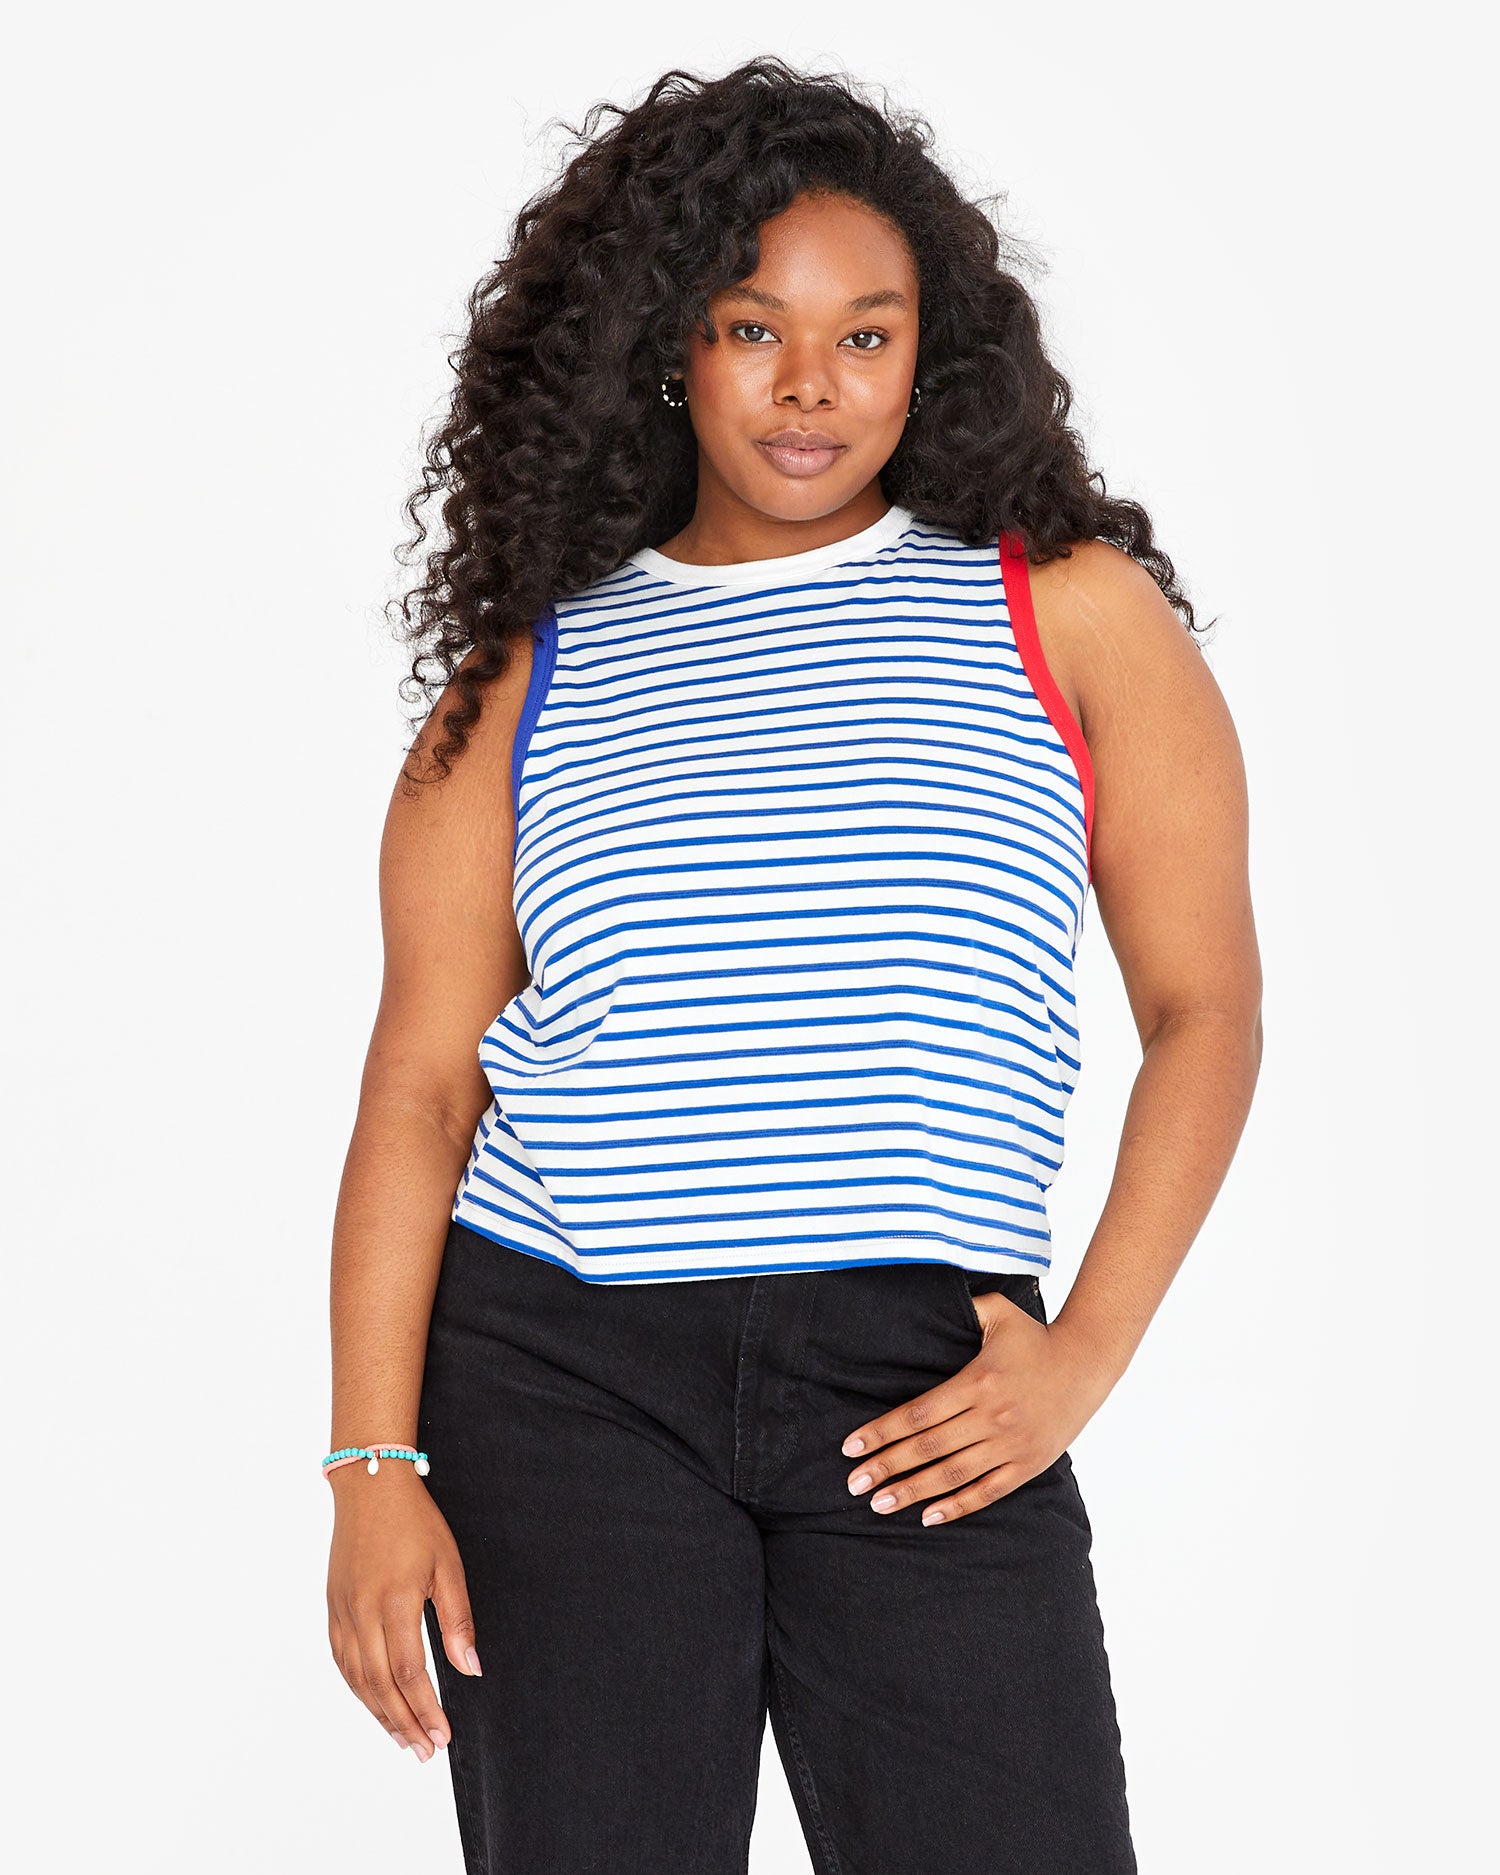 candice wearing the Cobalt and Cream Petit Stripe Camp Fit Tank with black jeans